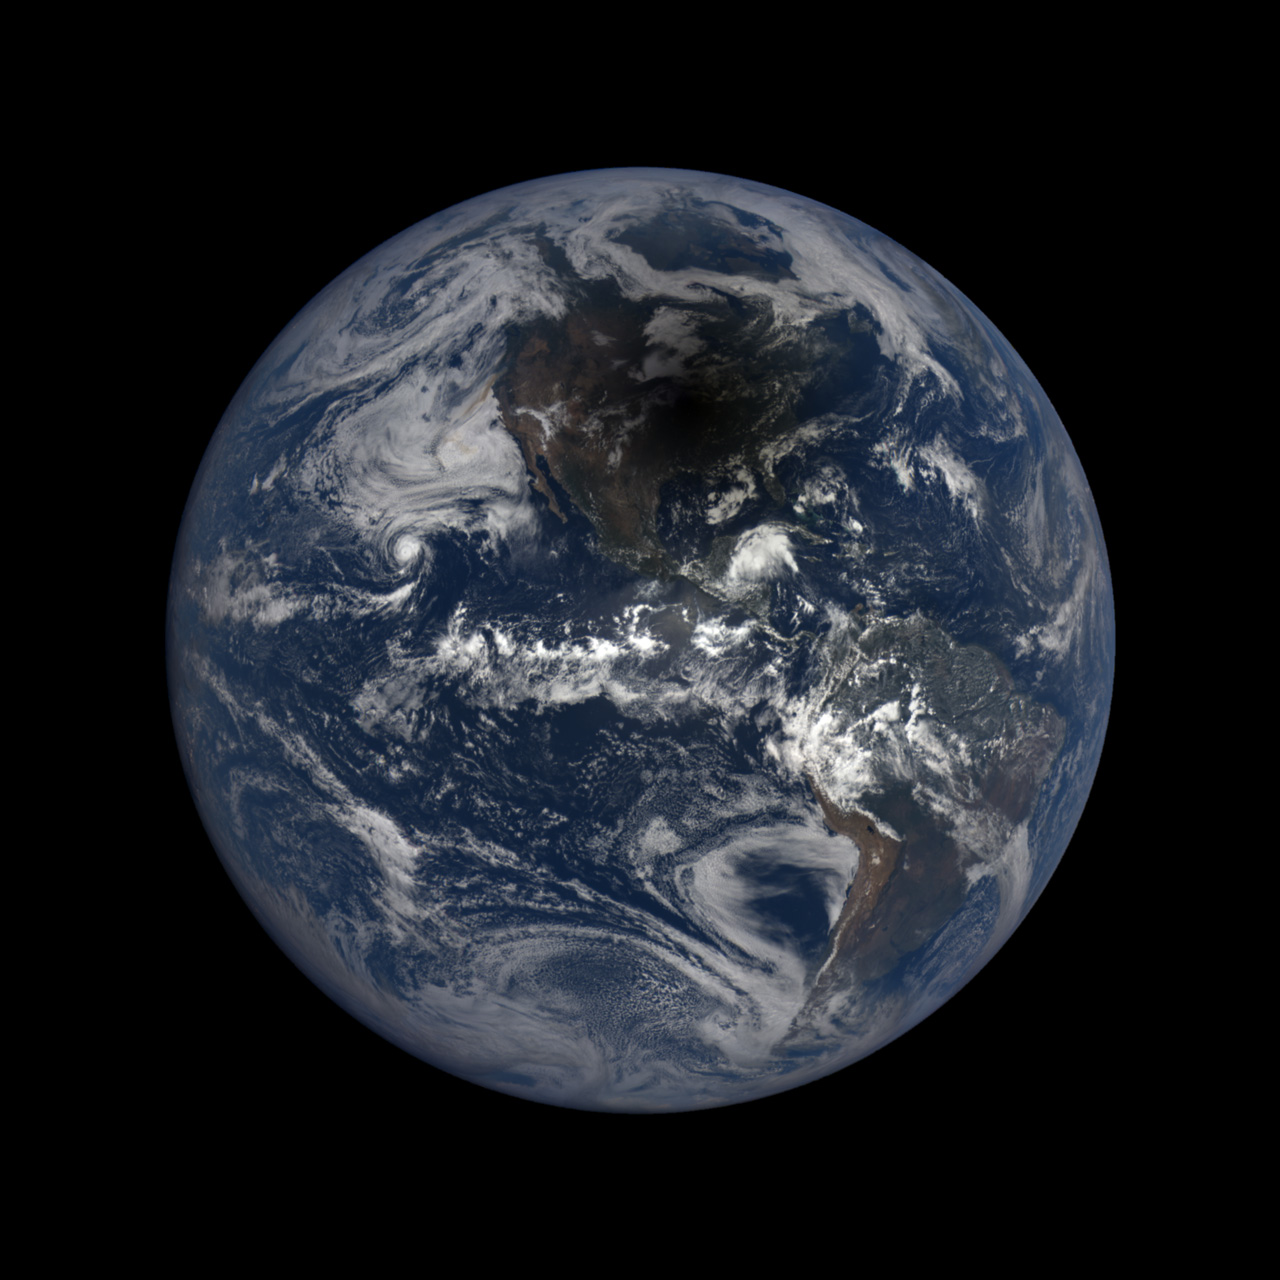 Full disk view of Earth with solar eclipse shadow visible over North America.